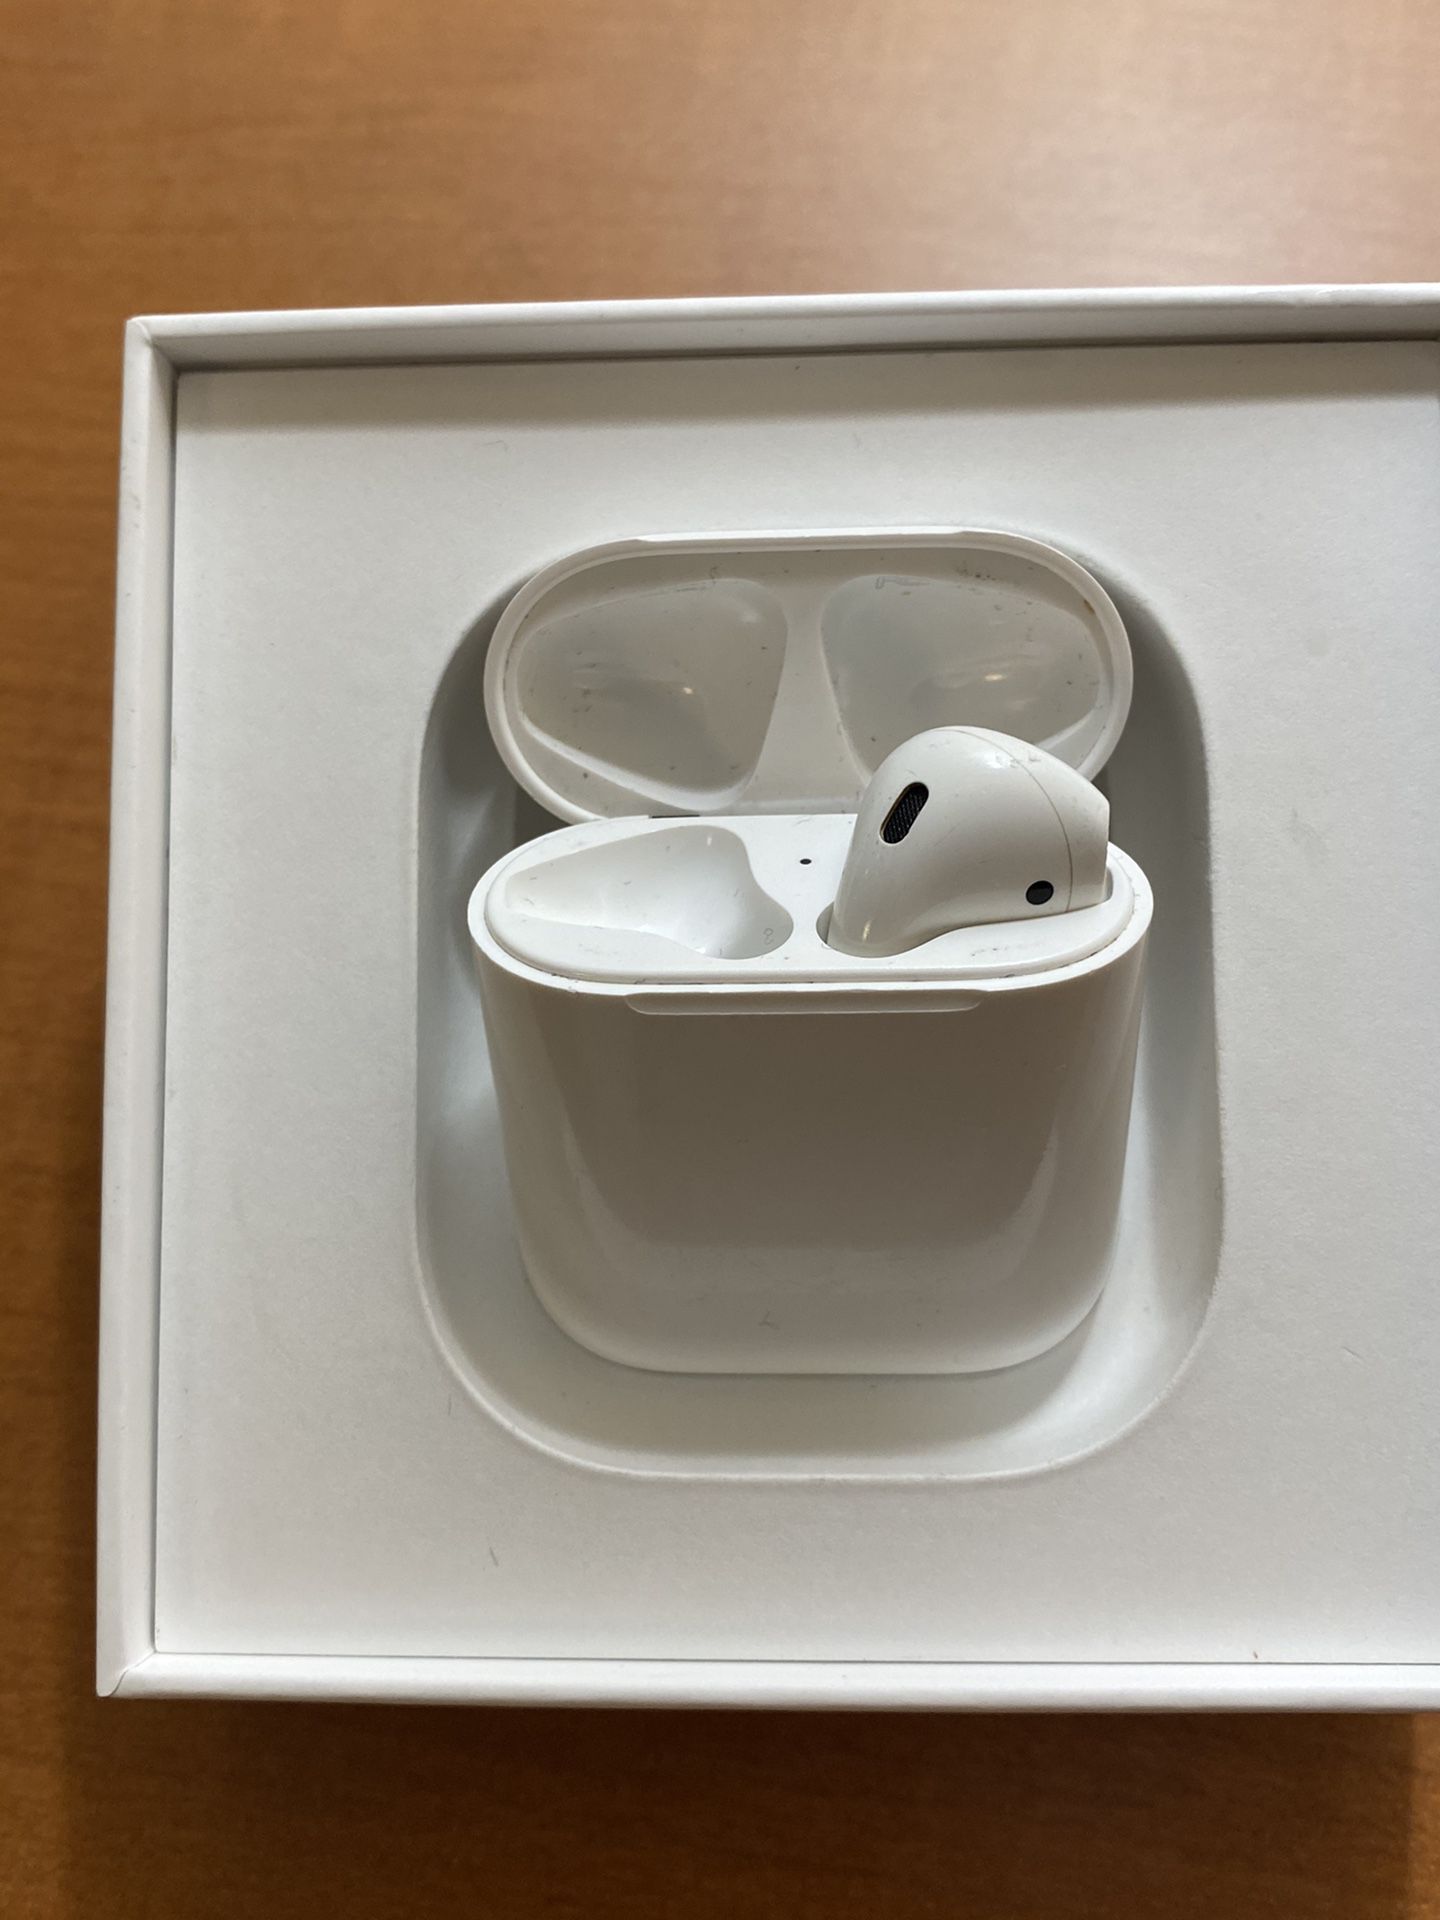 AirPod Case with Right AirPod 1st Gen